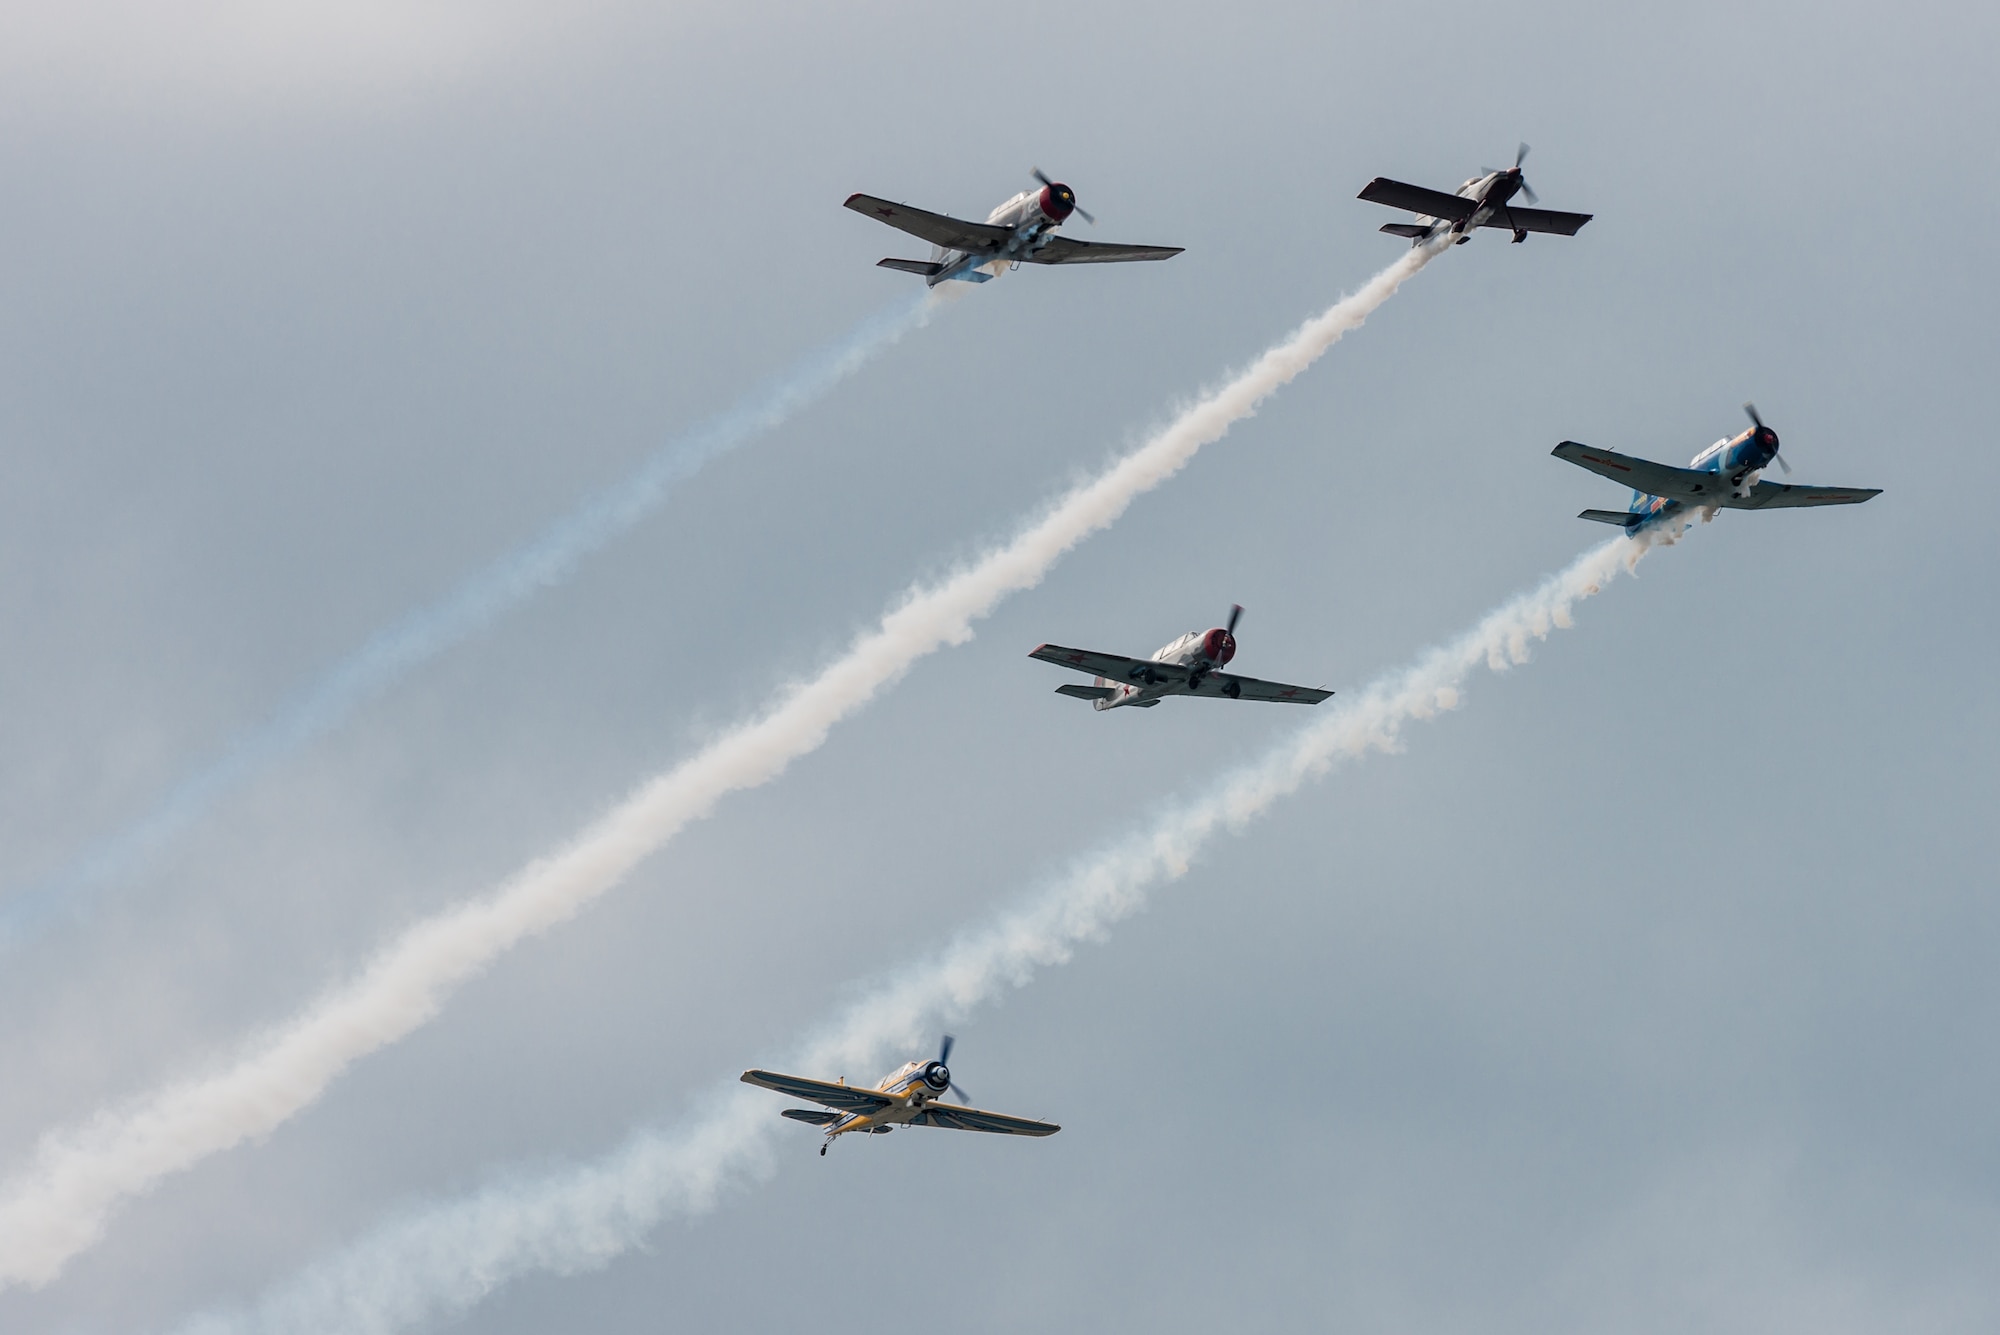 A group of World War II-era warbirds flies an aerial demonstration over the Ohio River April 22, 2017, during the Thunder Over Louisville air show in Louisville, Ky. The annual event has grown to become the largest single-day air show in the nation. (U.S. Air National Guard photo by Lt. Col. Dale Greer)